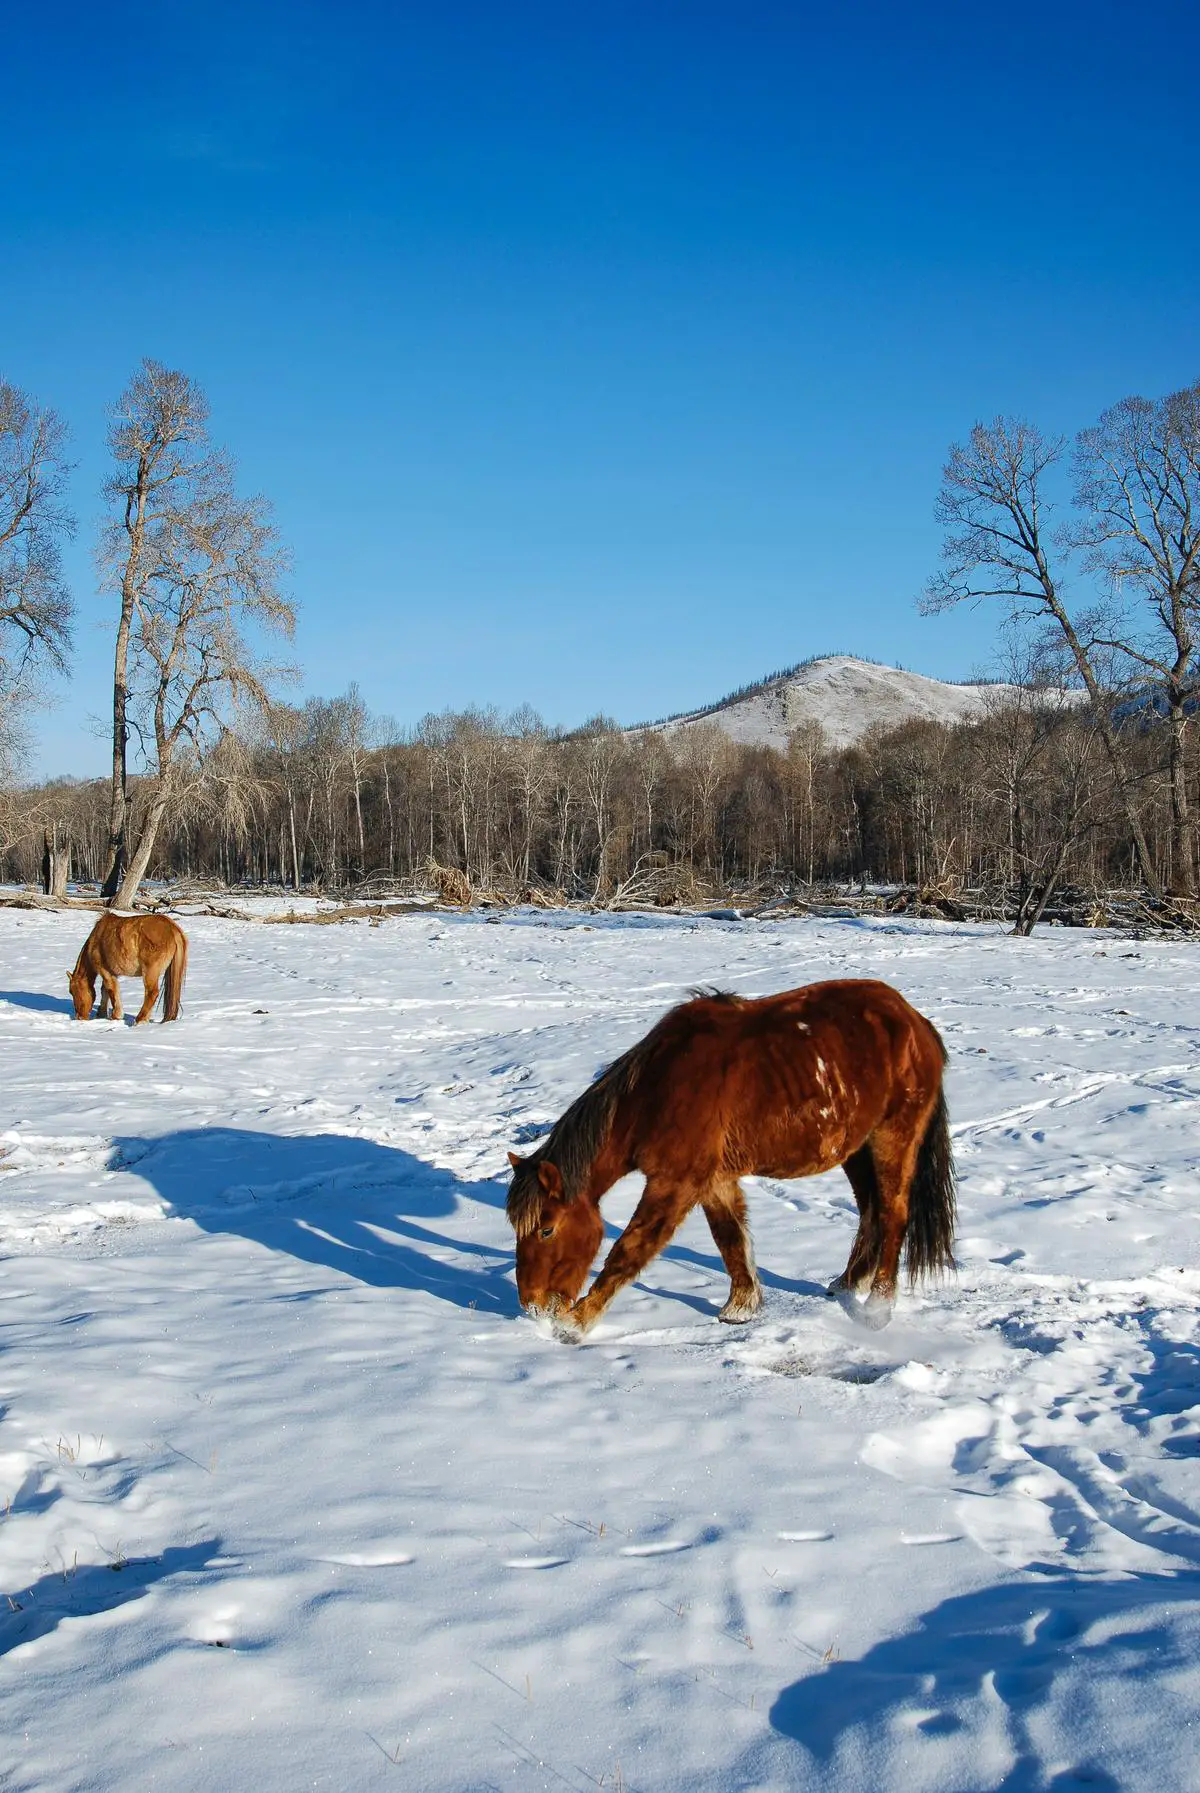 A horse standing in a snowy field, showcasing its ability to adapt to cold temperatures.